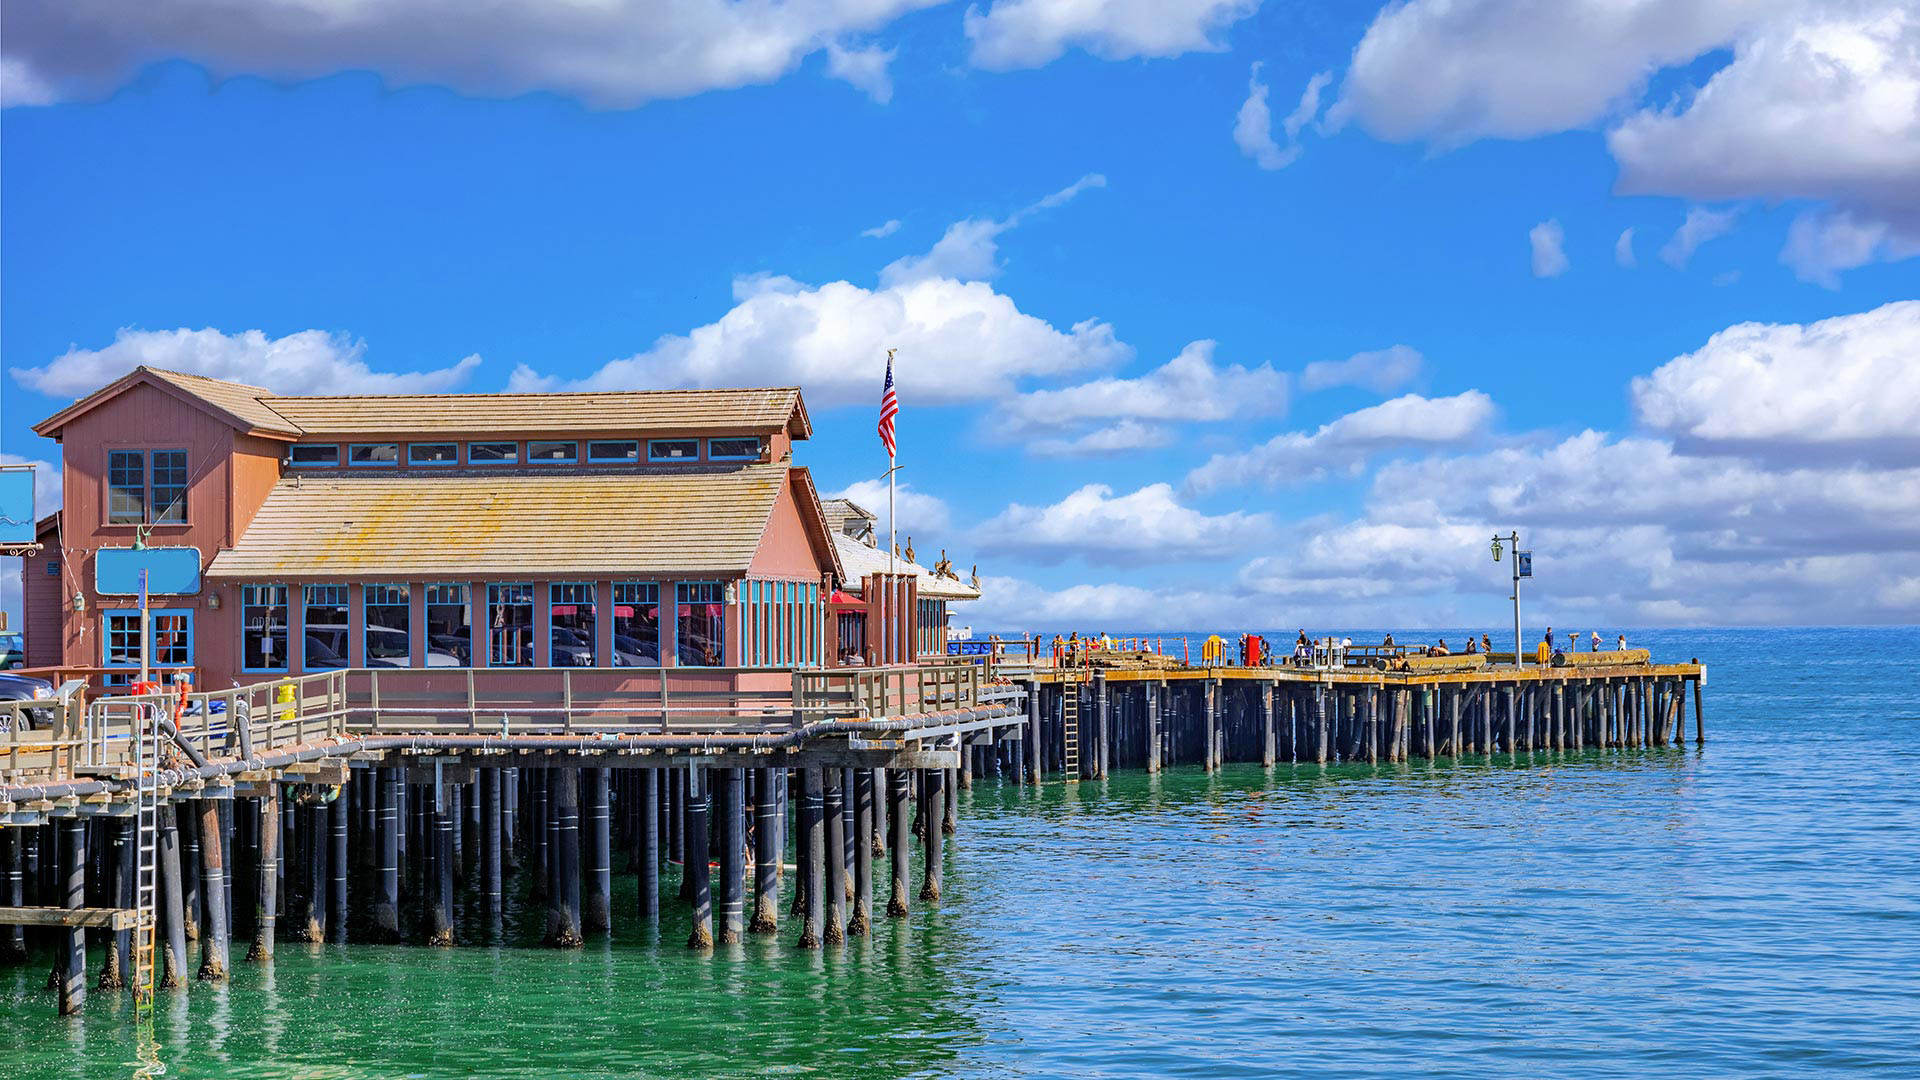 Pier at Stearns Wharf on a sunny day.